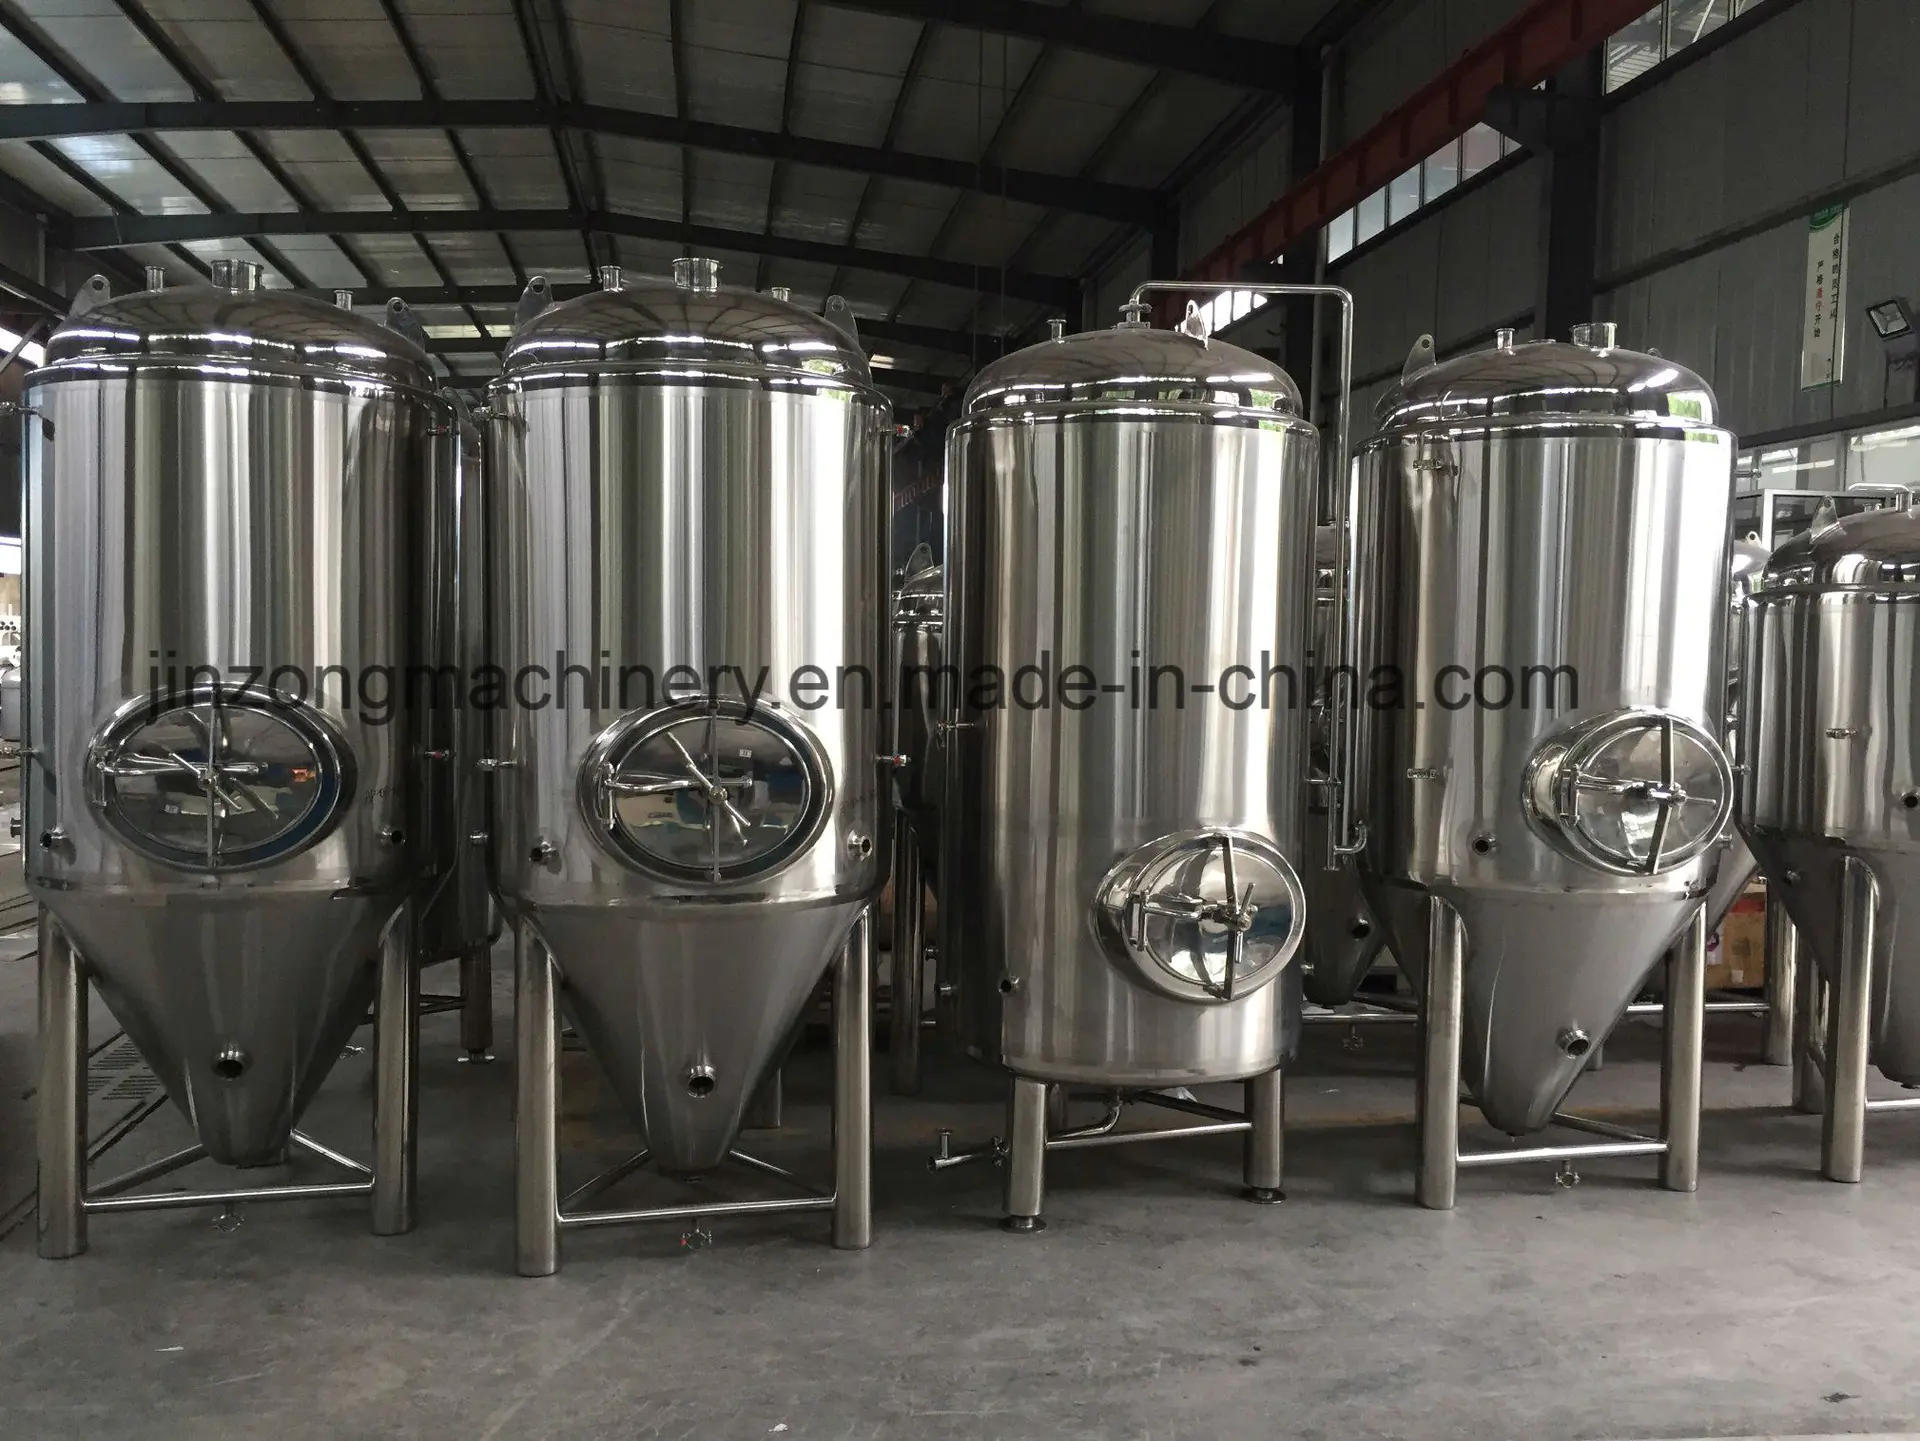 Sanitary Bright Conical Beer Fermenter Tank